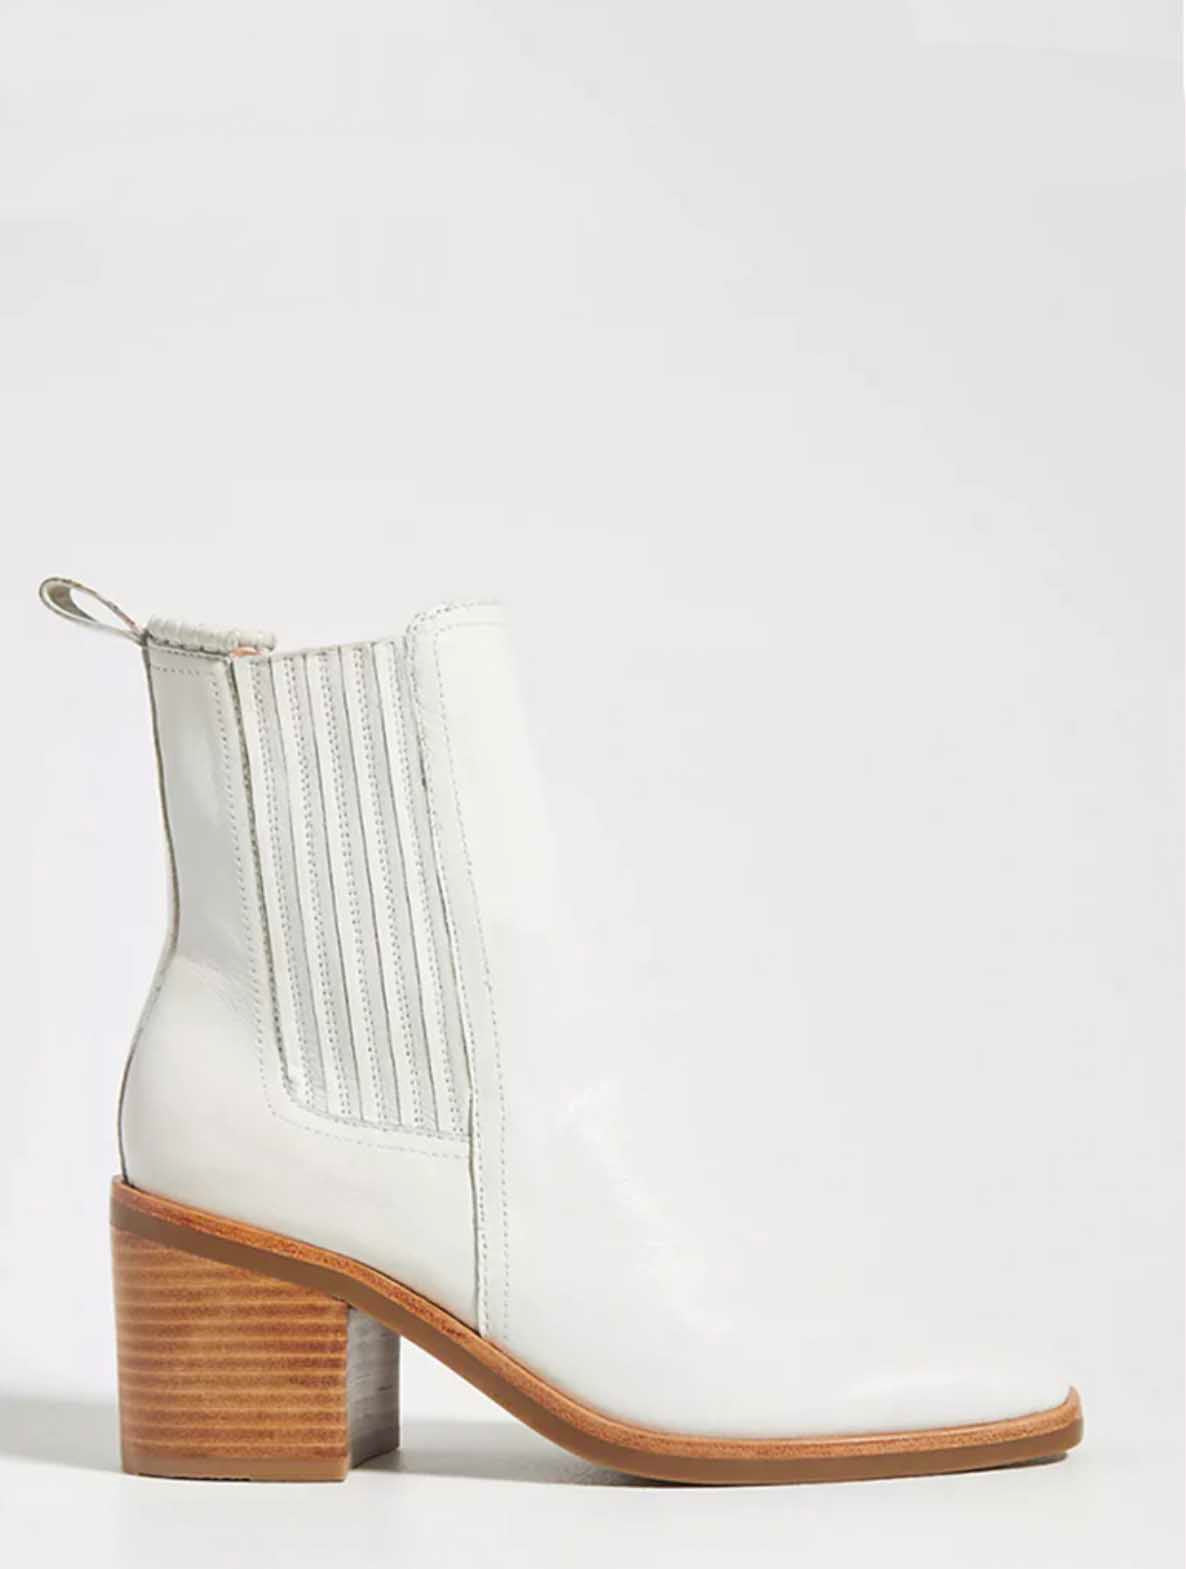 Silent D Naydo Heeled Ankle Boot in Winter White